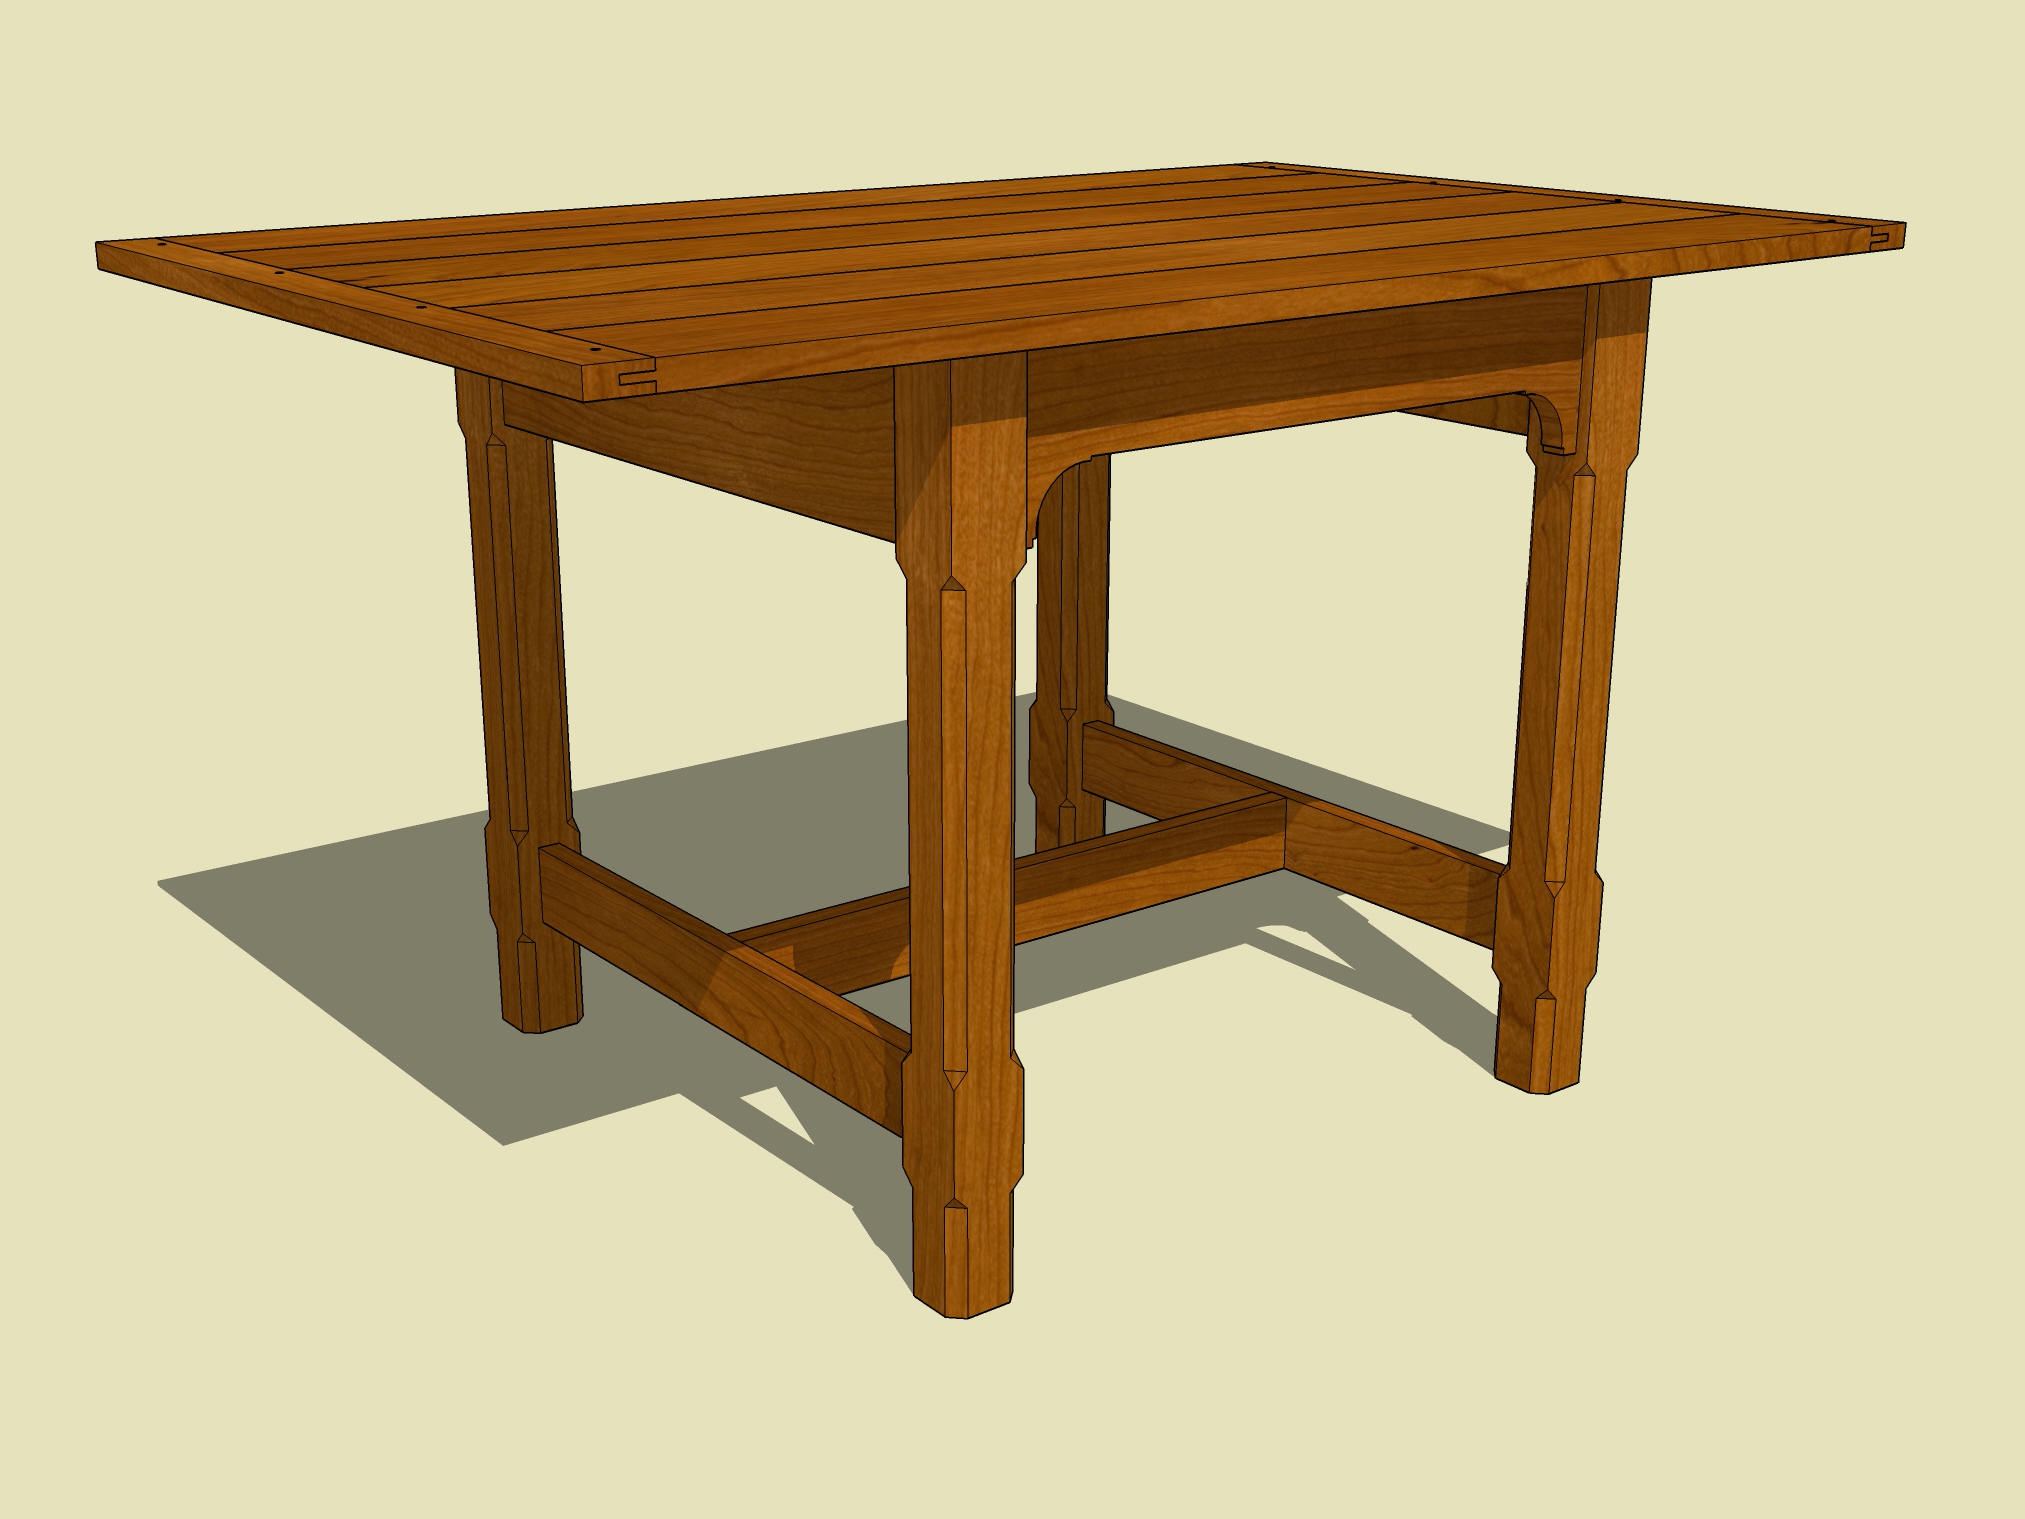 Build Woodworking Plans Square Dining Table DIY PDF patio 